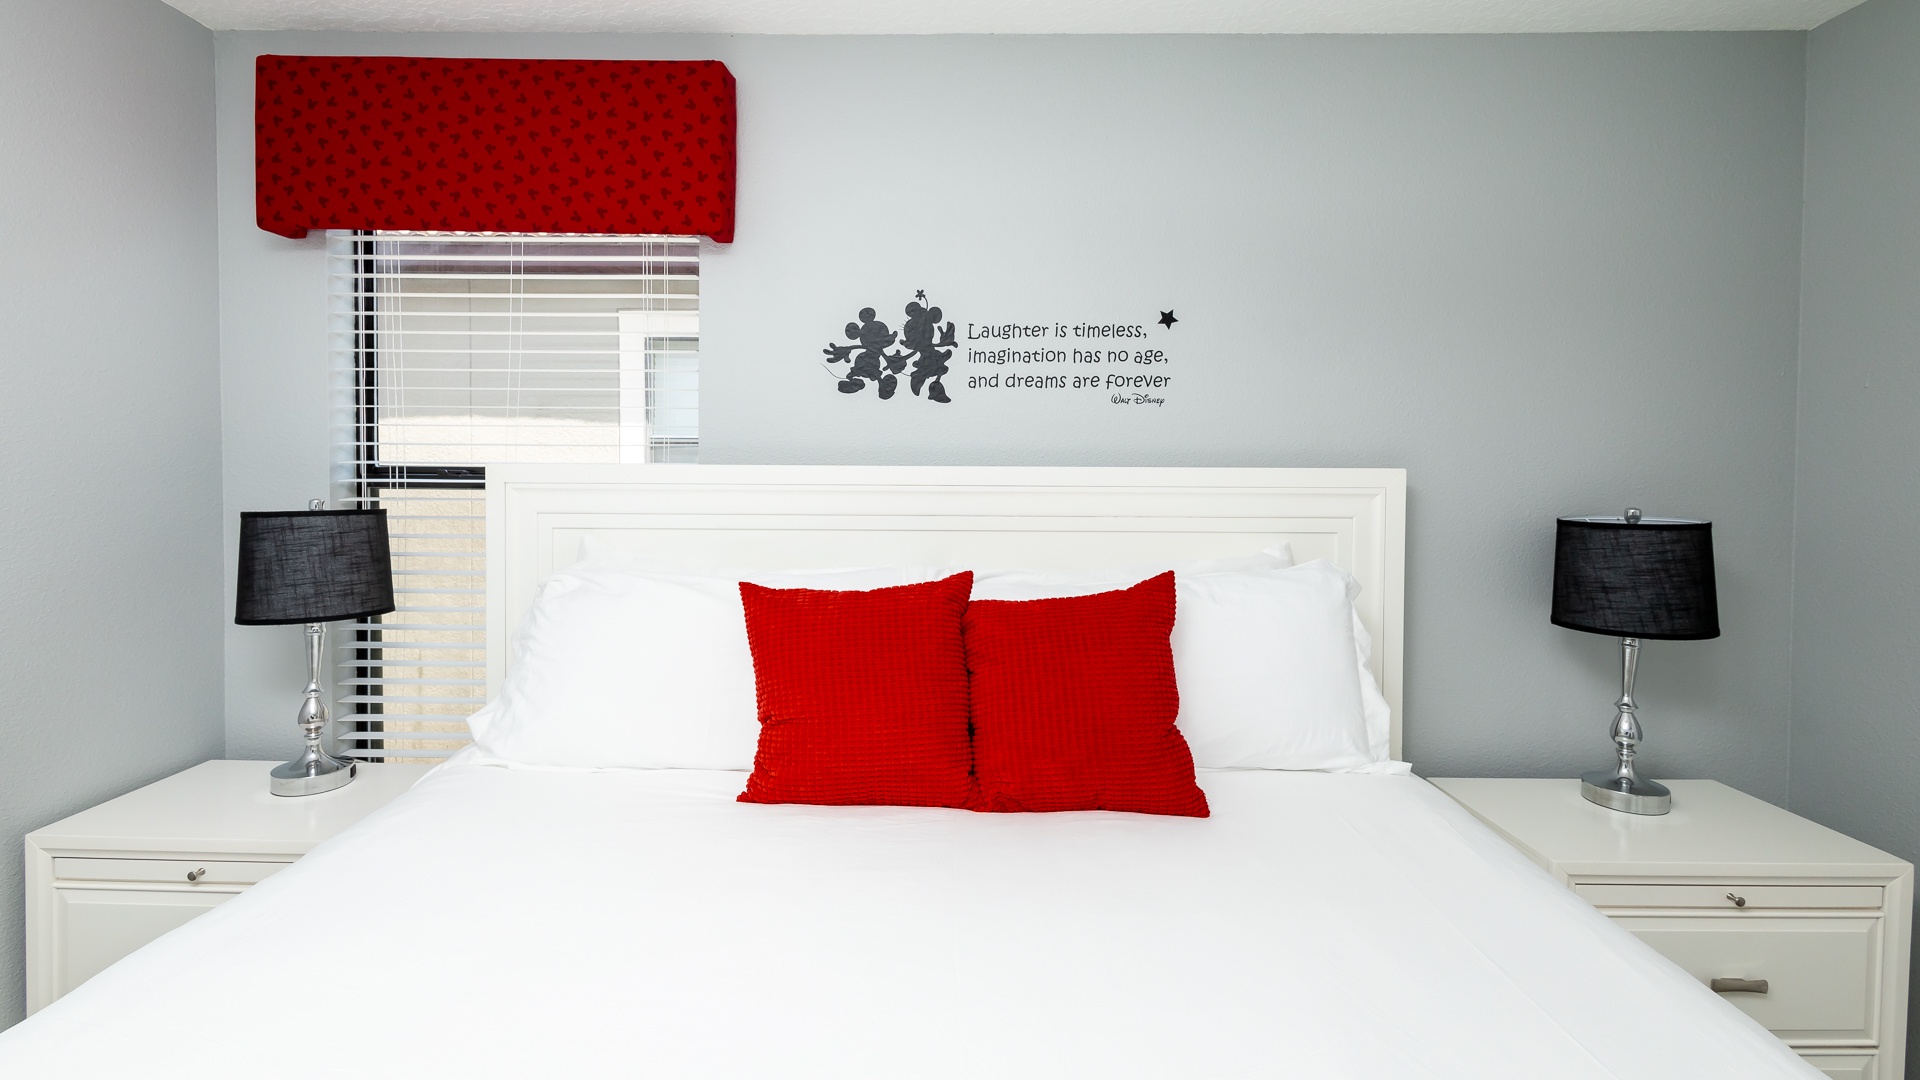 Bedroom 3 Mickey Mouse themed with king bed, Smart TV, and shared ensuite